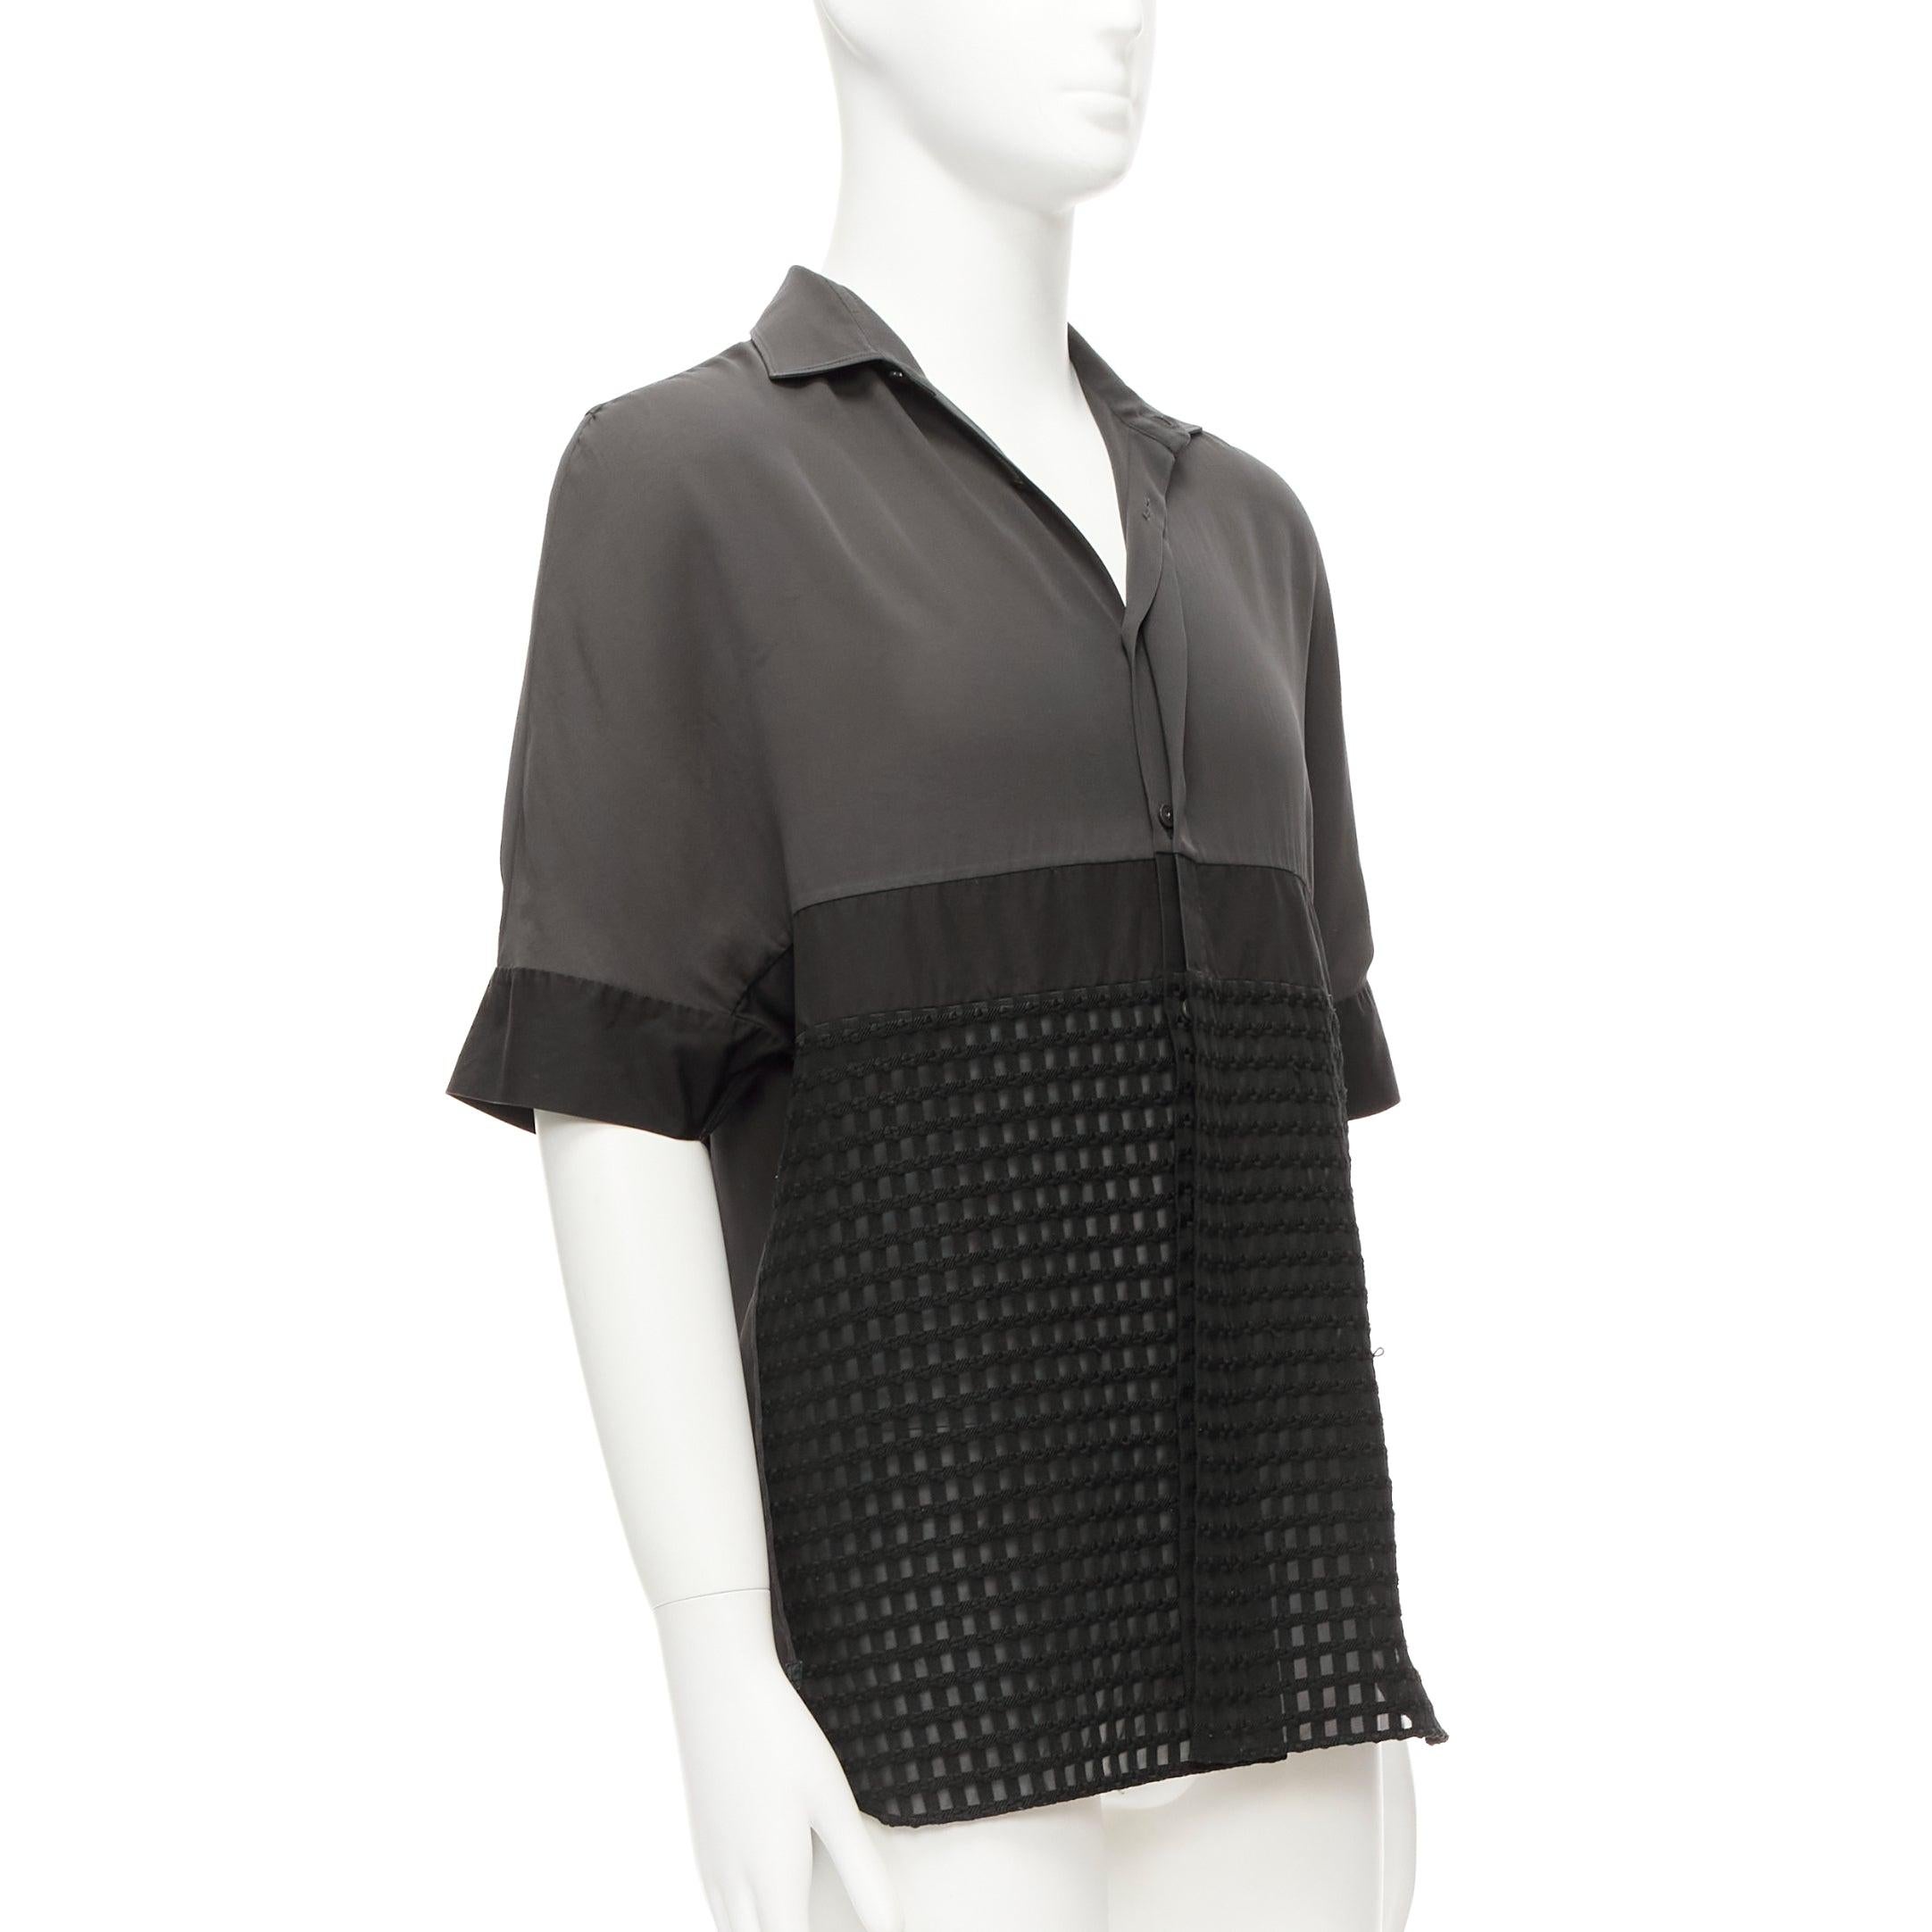 LANVIN grey black silky twill mix texture short sleeves dress shirt EU38/15 S
Reference: CNLE/A00287
Brand: Lanvin
Designer: Alber Elbaz
Material: Polyester
Color: Grey, Black
Pattern: Solid
Closure: Button
Made in: Italy

CONDITION:
Condition: